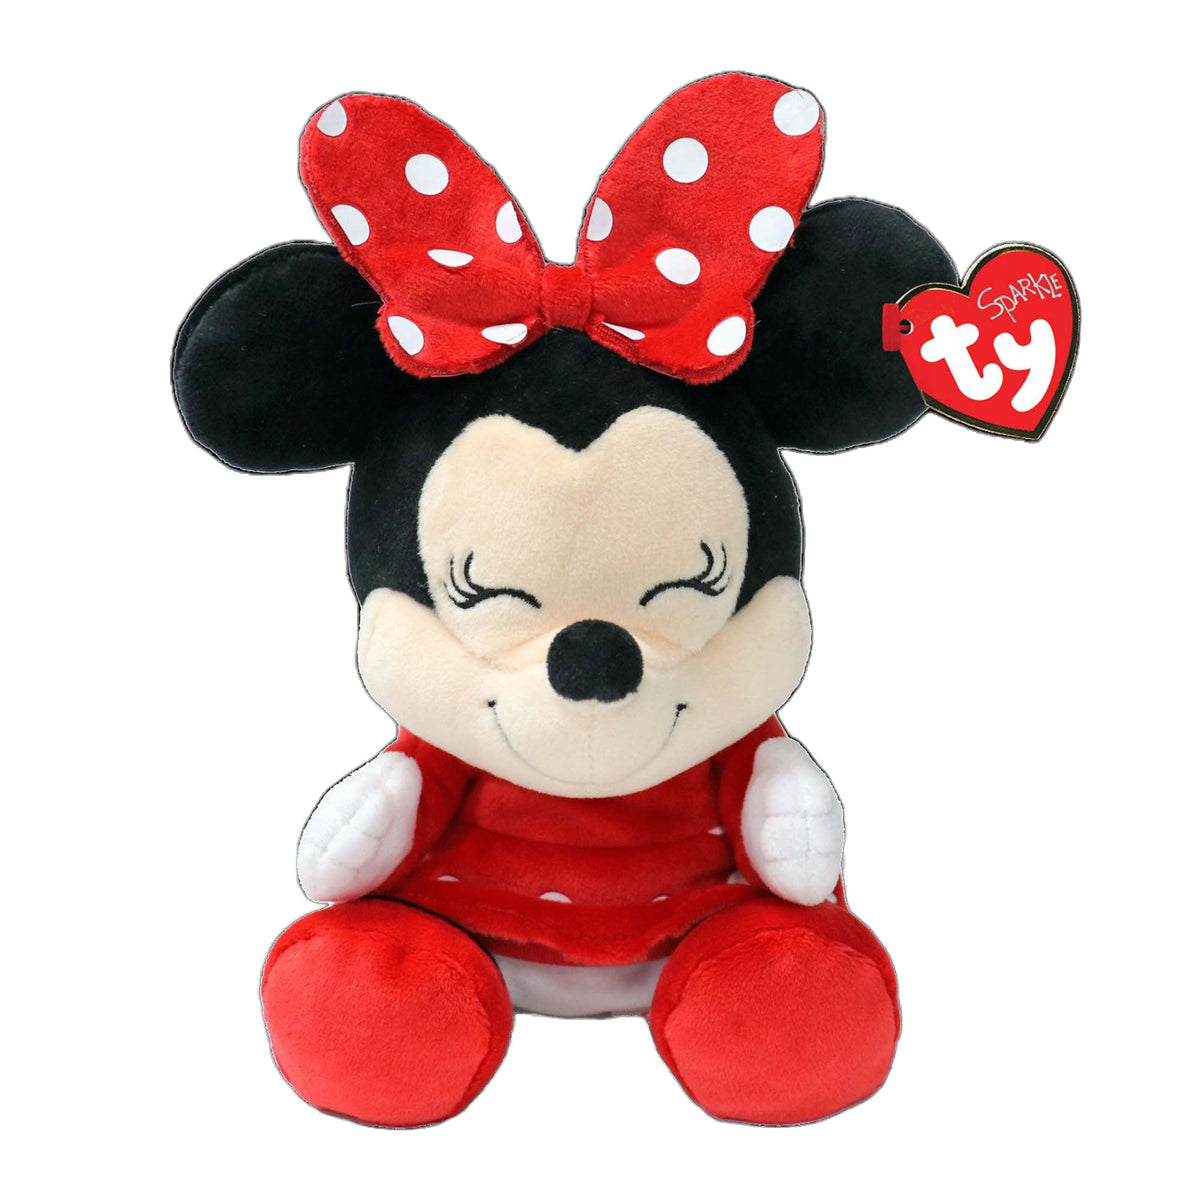 TY INC Plushes TY Disney Soft Plush, Minnie Mouse, 13 Inches, 1 Count